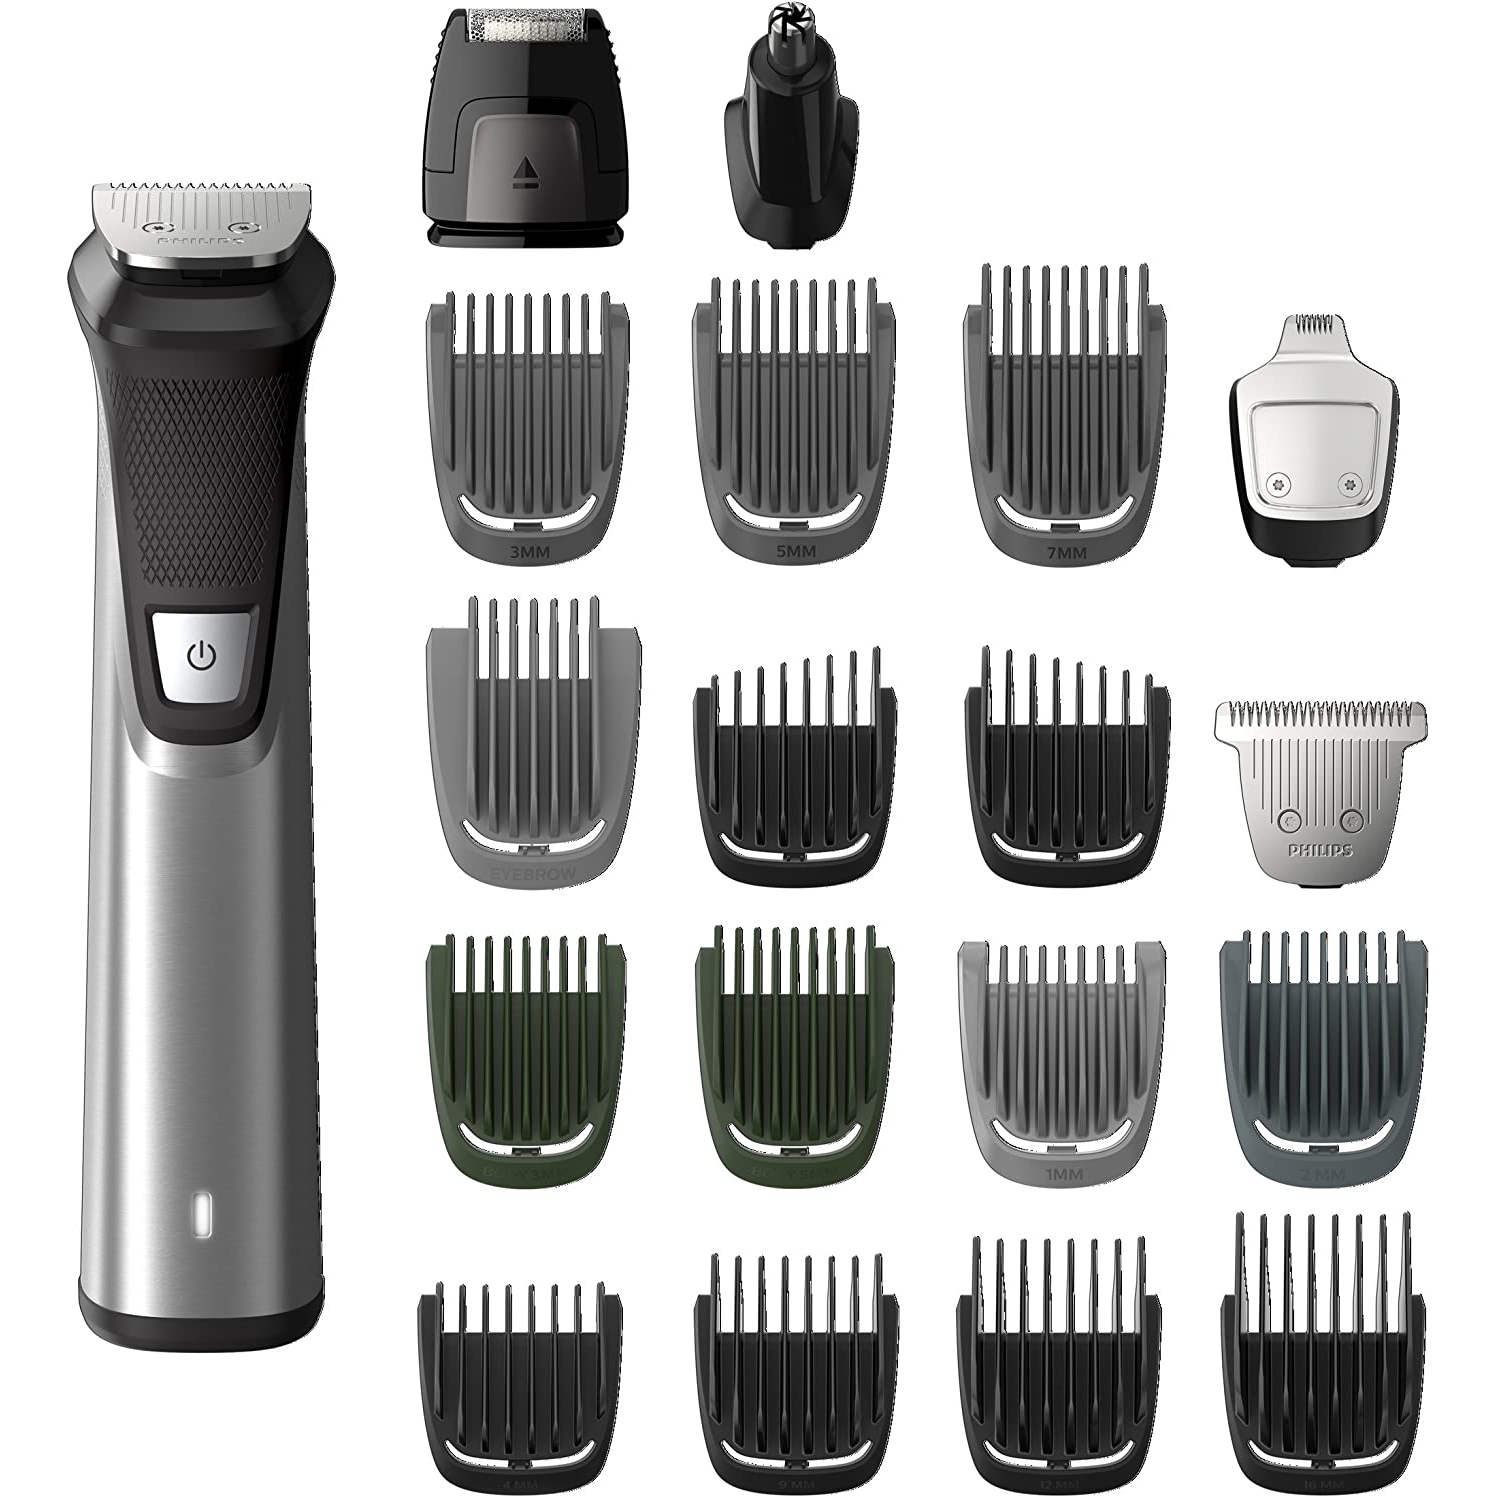 Philips Multigroom Series 7000 Cordless Wet & Dry with 19 Trimming Accessories and Storage Bag, MG7770/18